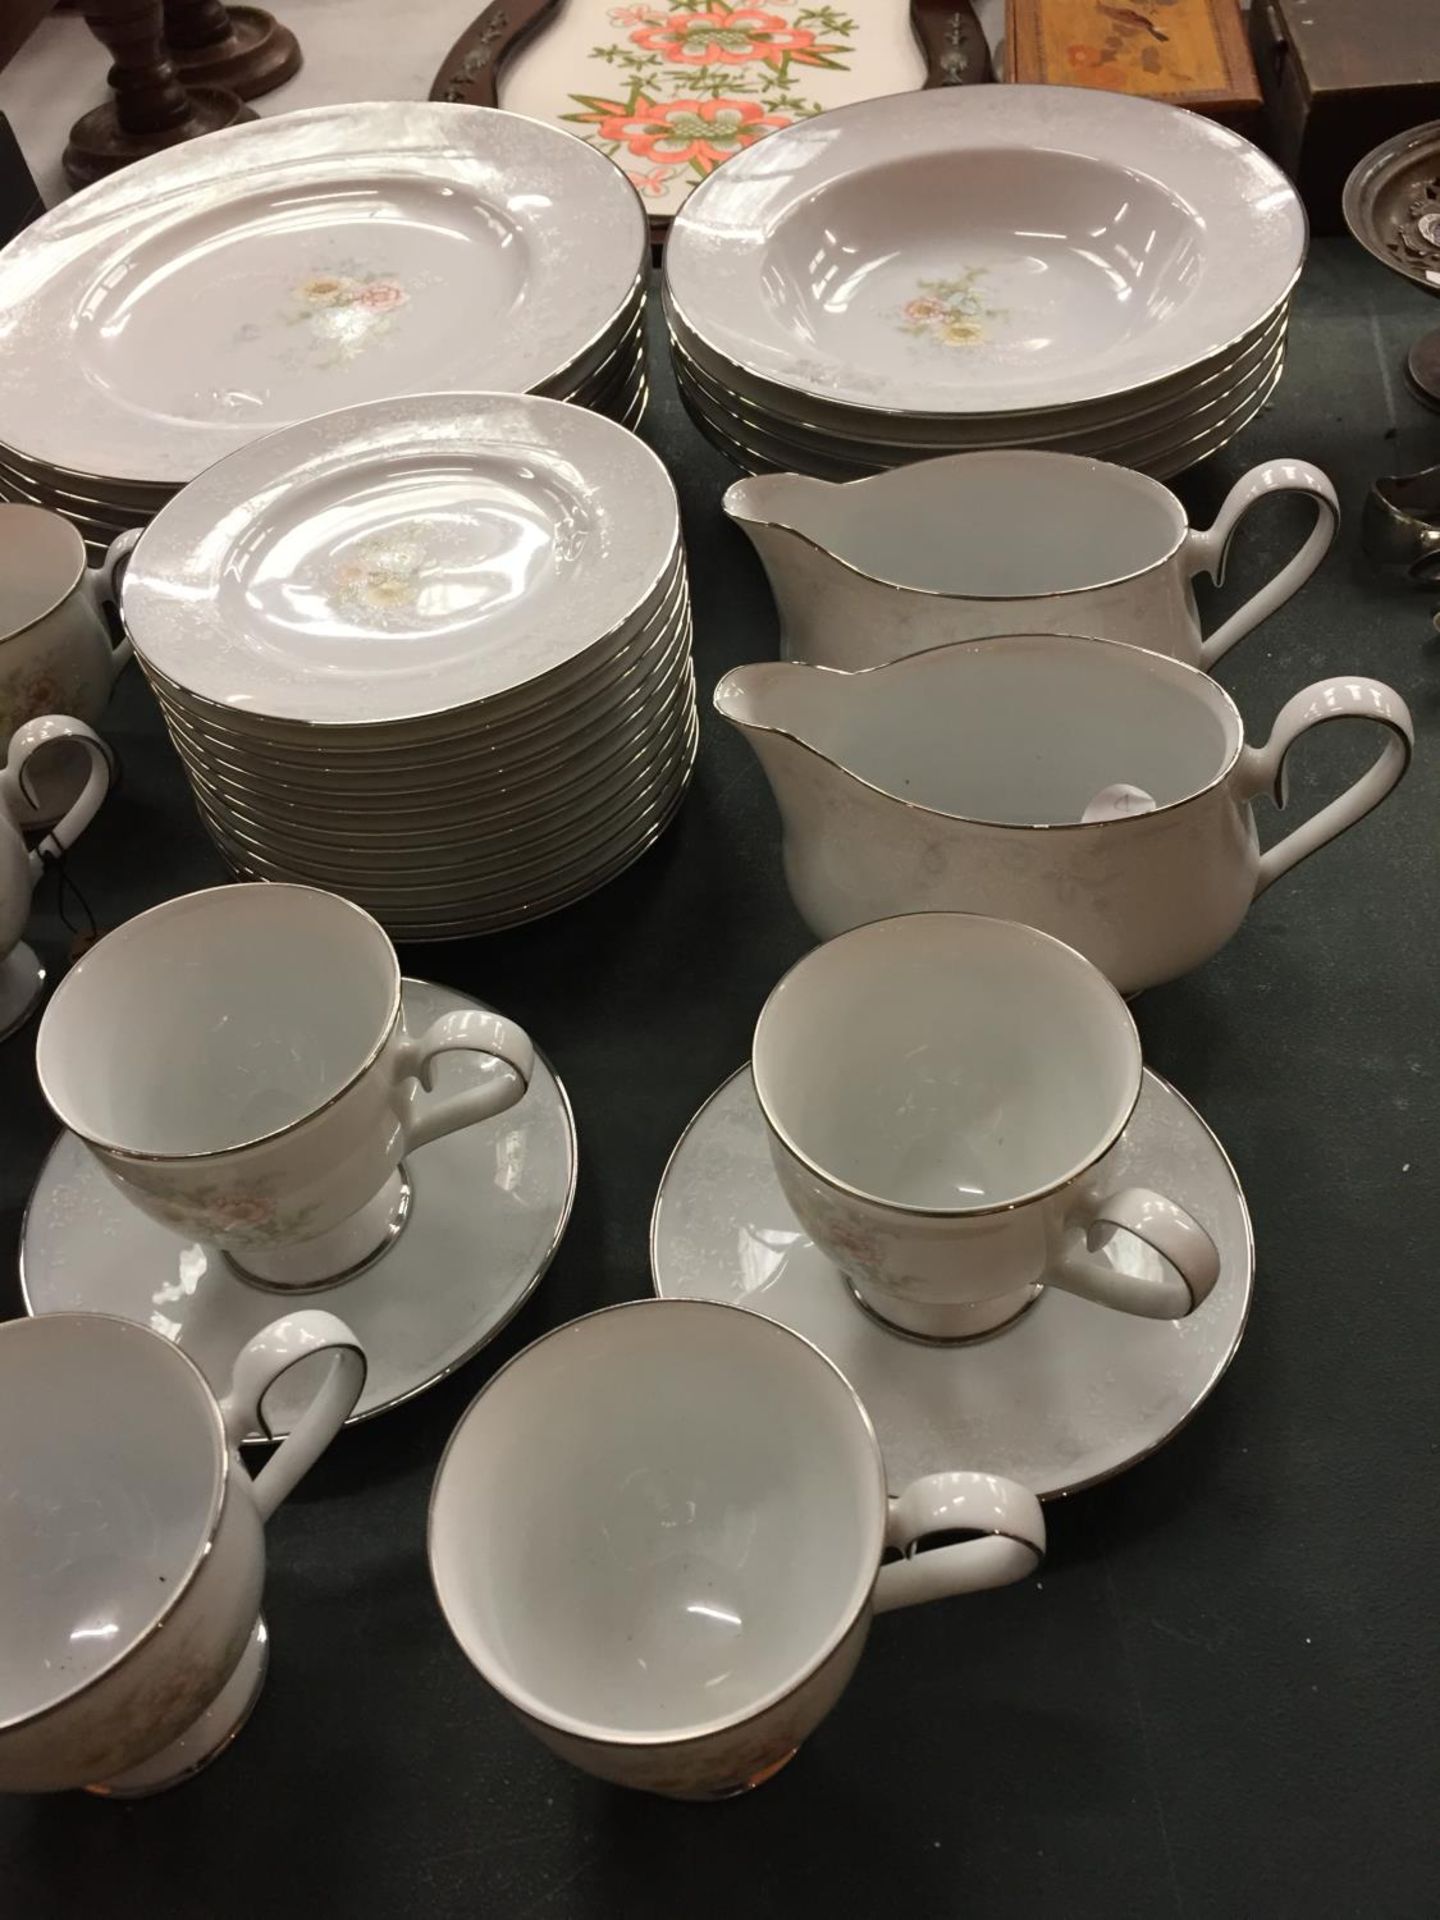 A LARGE COLLECTION OF NORITAKE IRELAND CHINA DINNER WARE IN THE ANTICIPATION DESIGN - Image 2 of 5